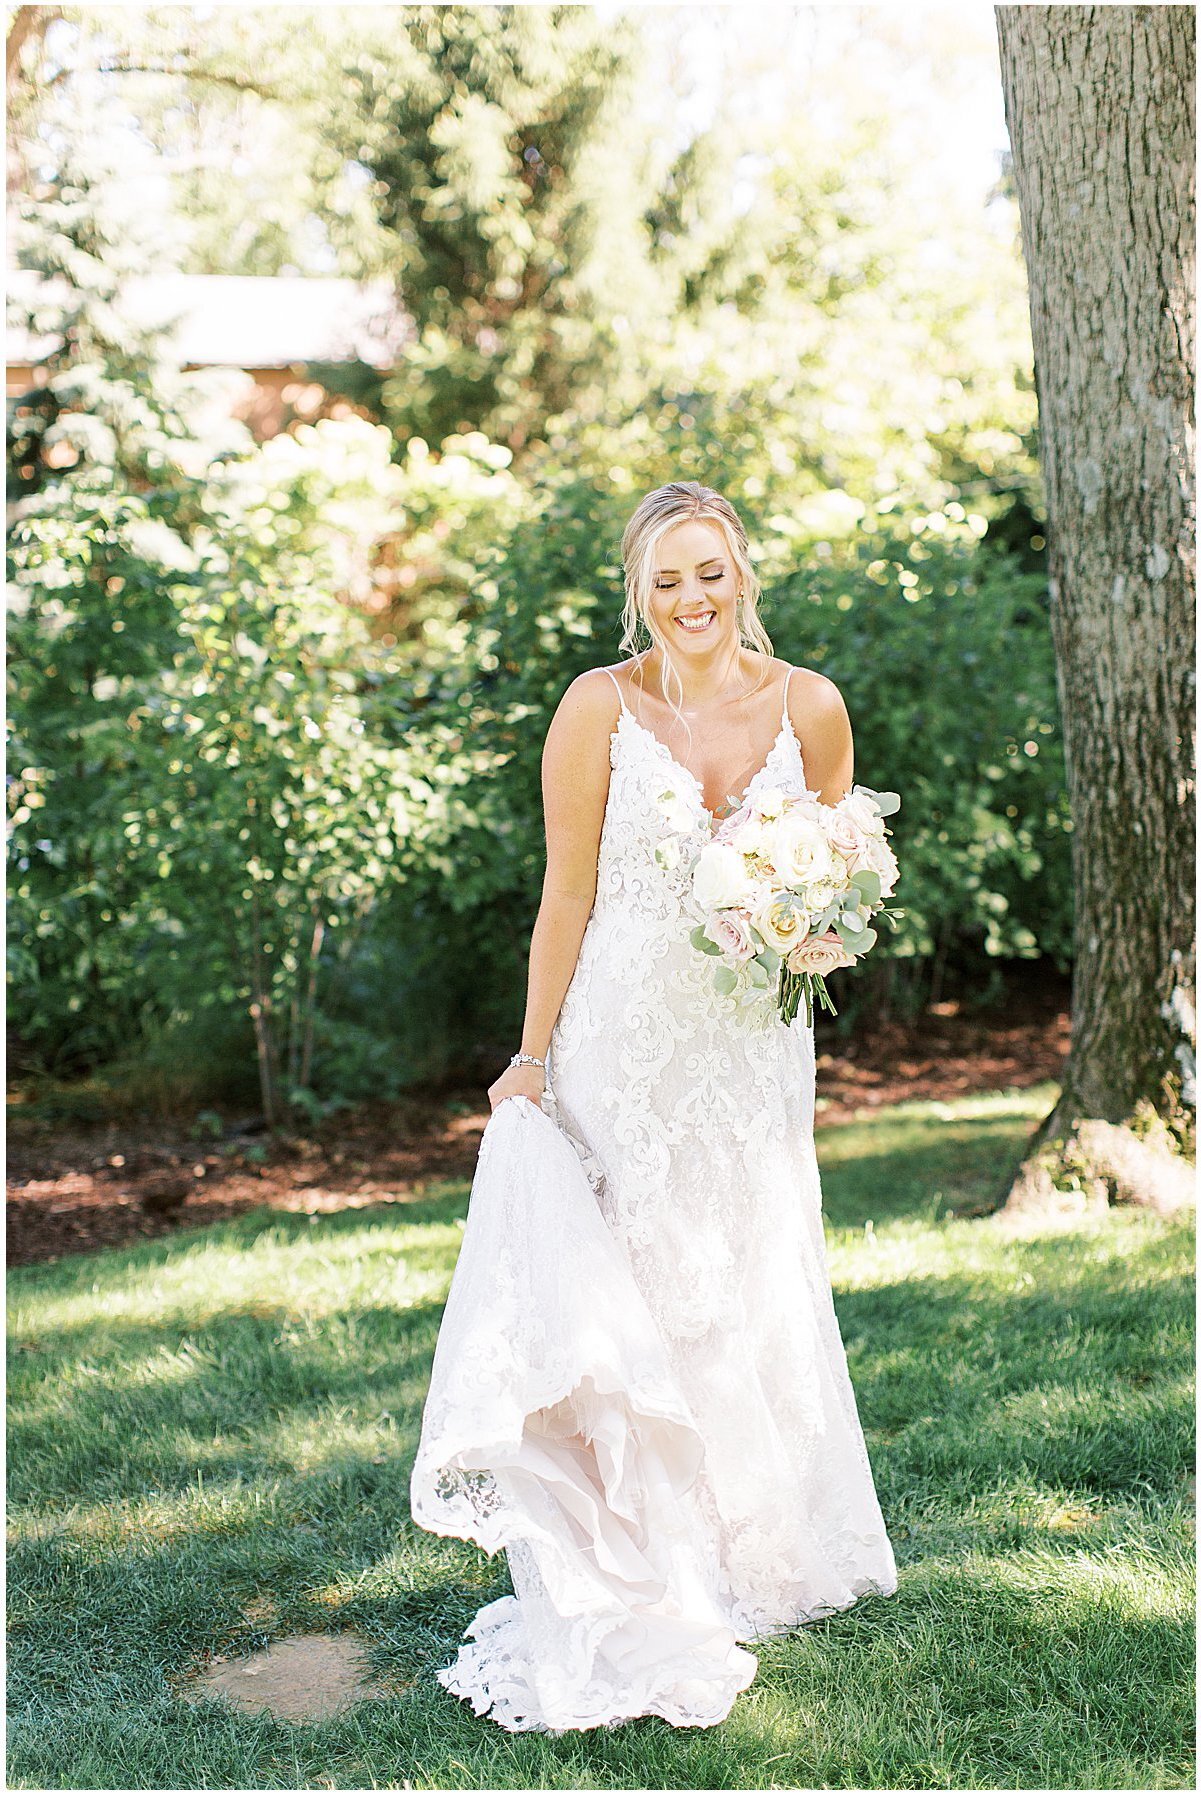 ivory-and-beau-bride-michelle-wedding-dress-bridal-gown-wedding-gown-bridal-shop-bridal-boutique-bride-bridal-shopping-real-bride-maggie-sottero-Lake-Wawasee-Wedding-with-Sami-Renee-Photography_0018 copy.jpg